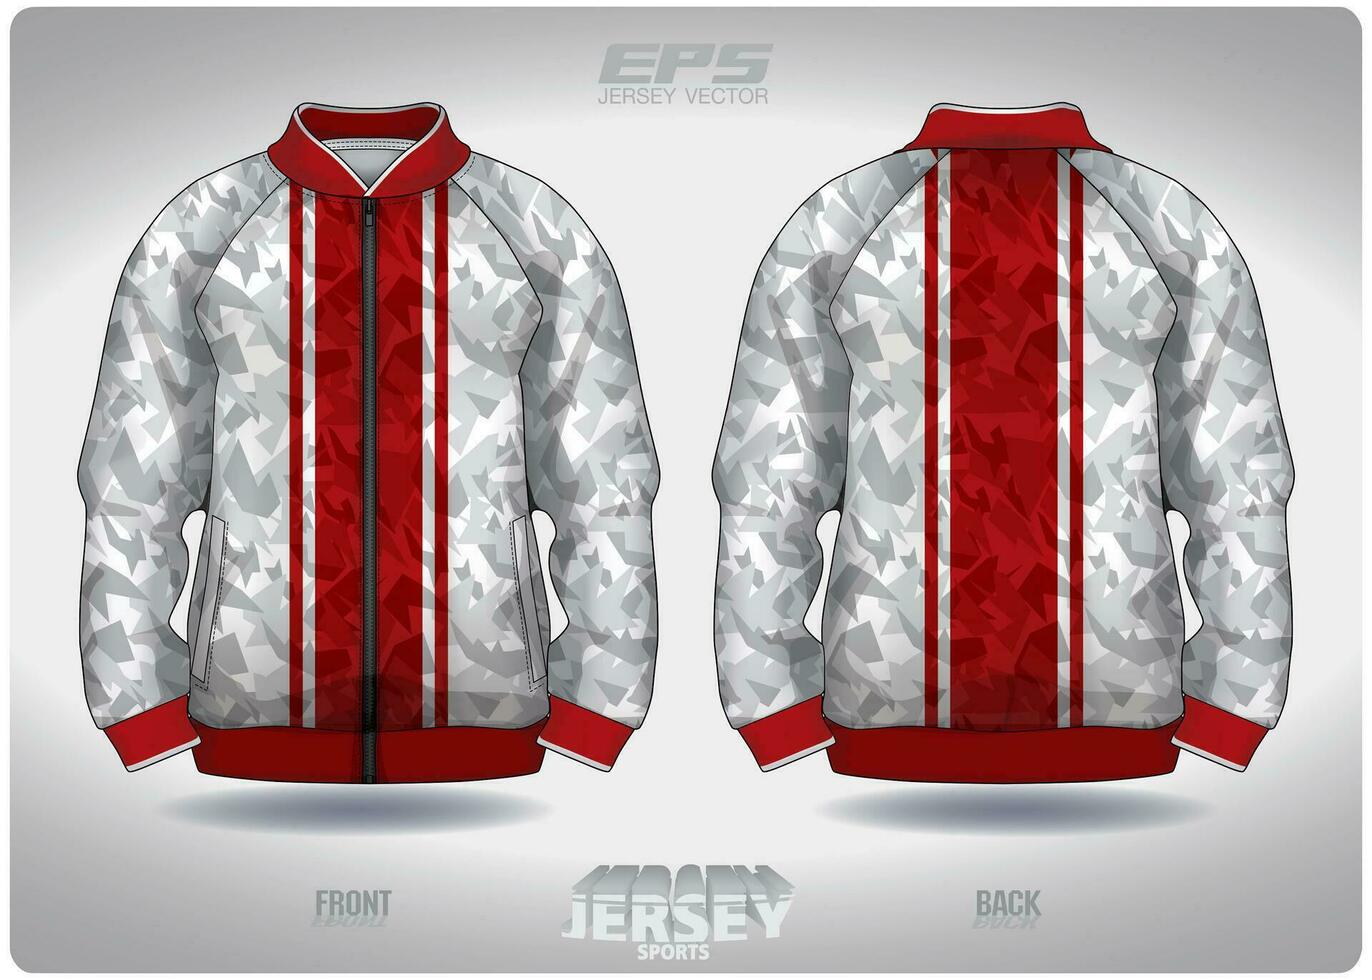 EPS jersey sports shirt vector.red white broken glass pattern design, illustration, textile background for sports long sleeve sweater vector